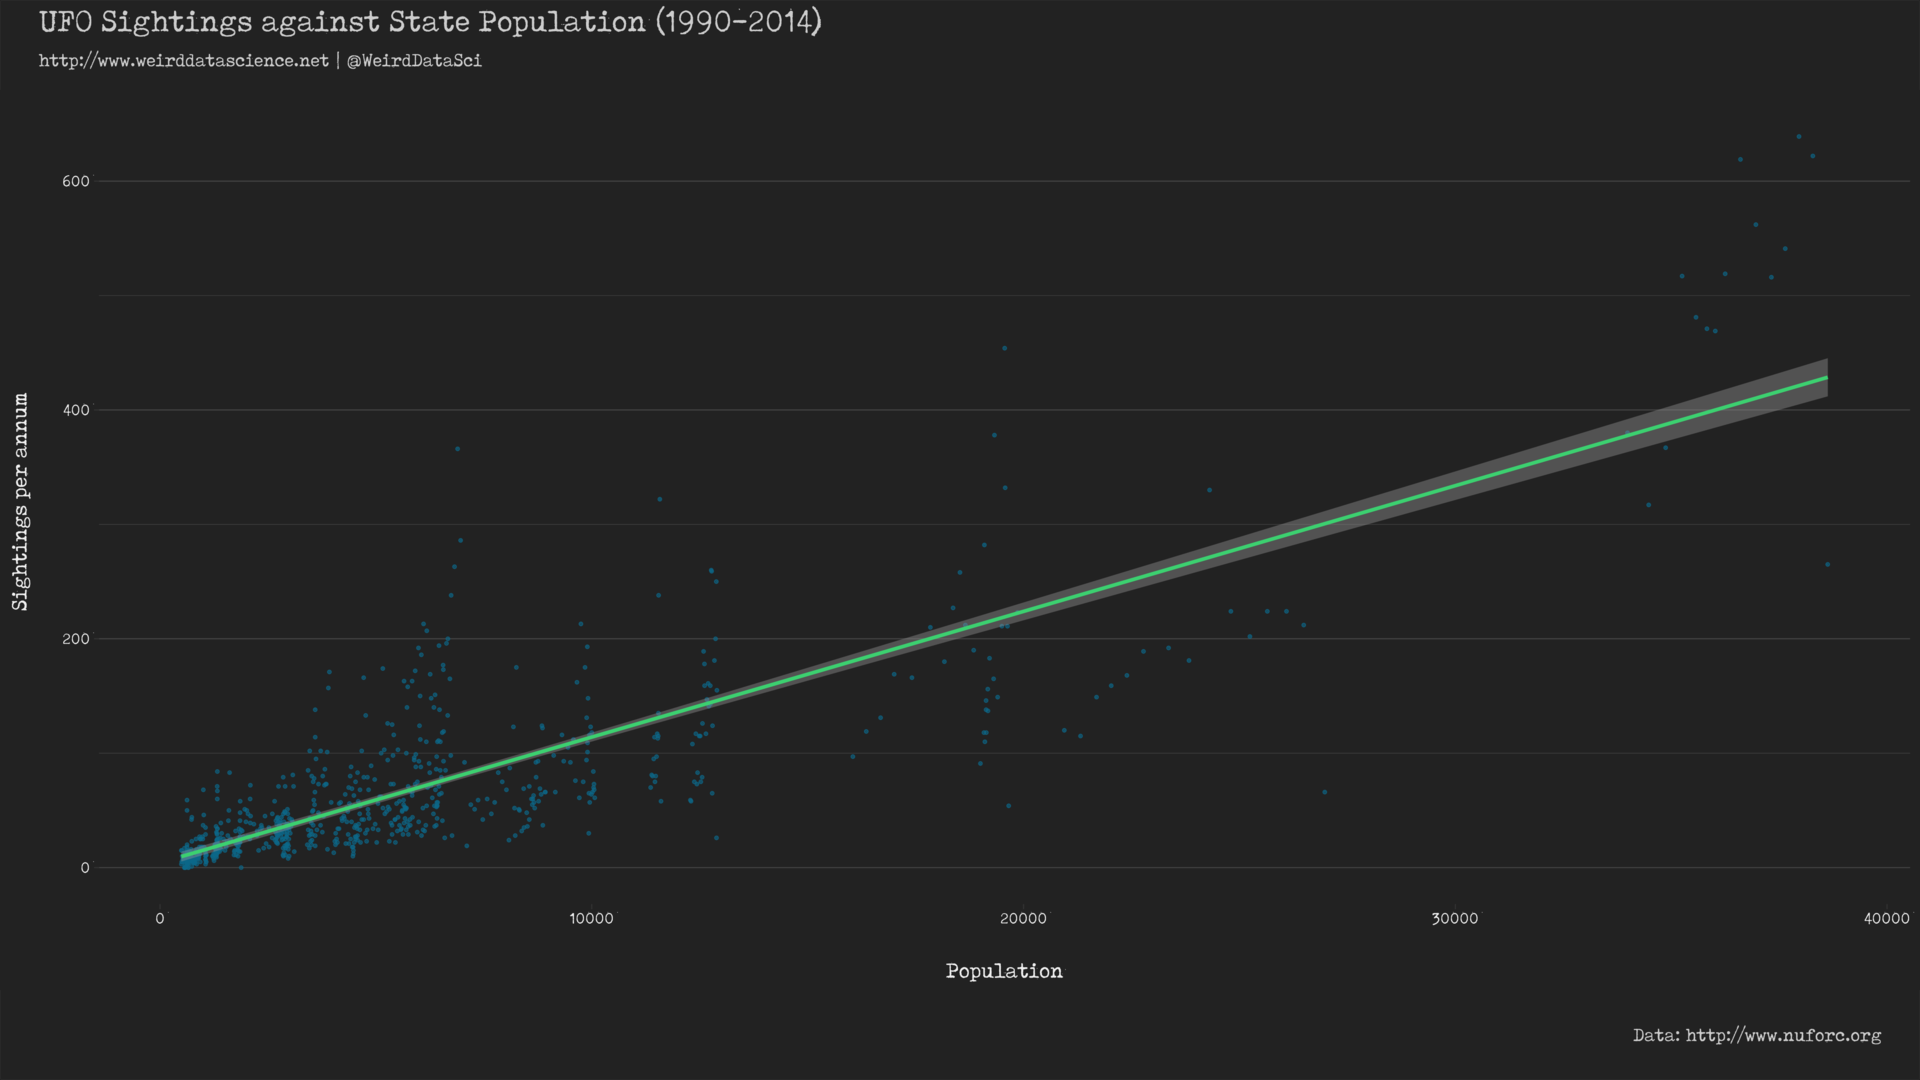 Regression of UFO sightings against population.